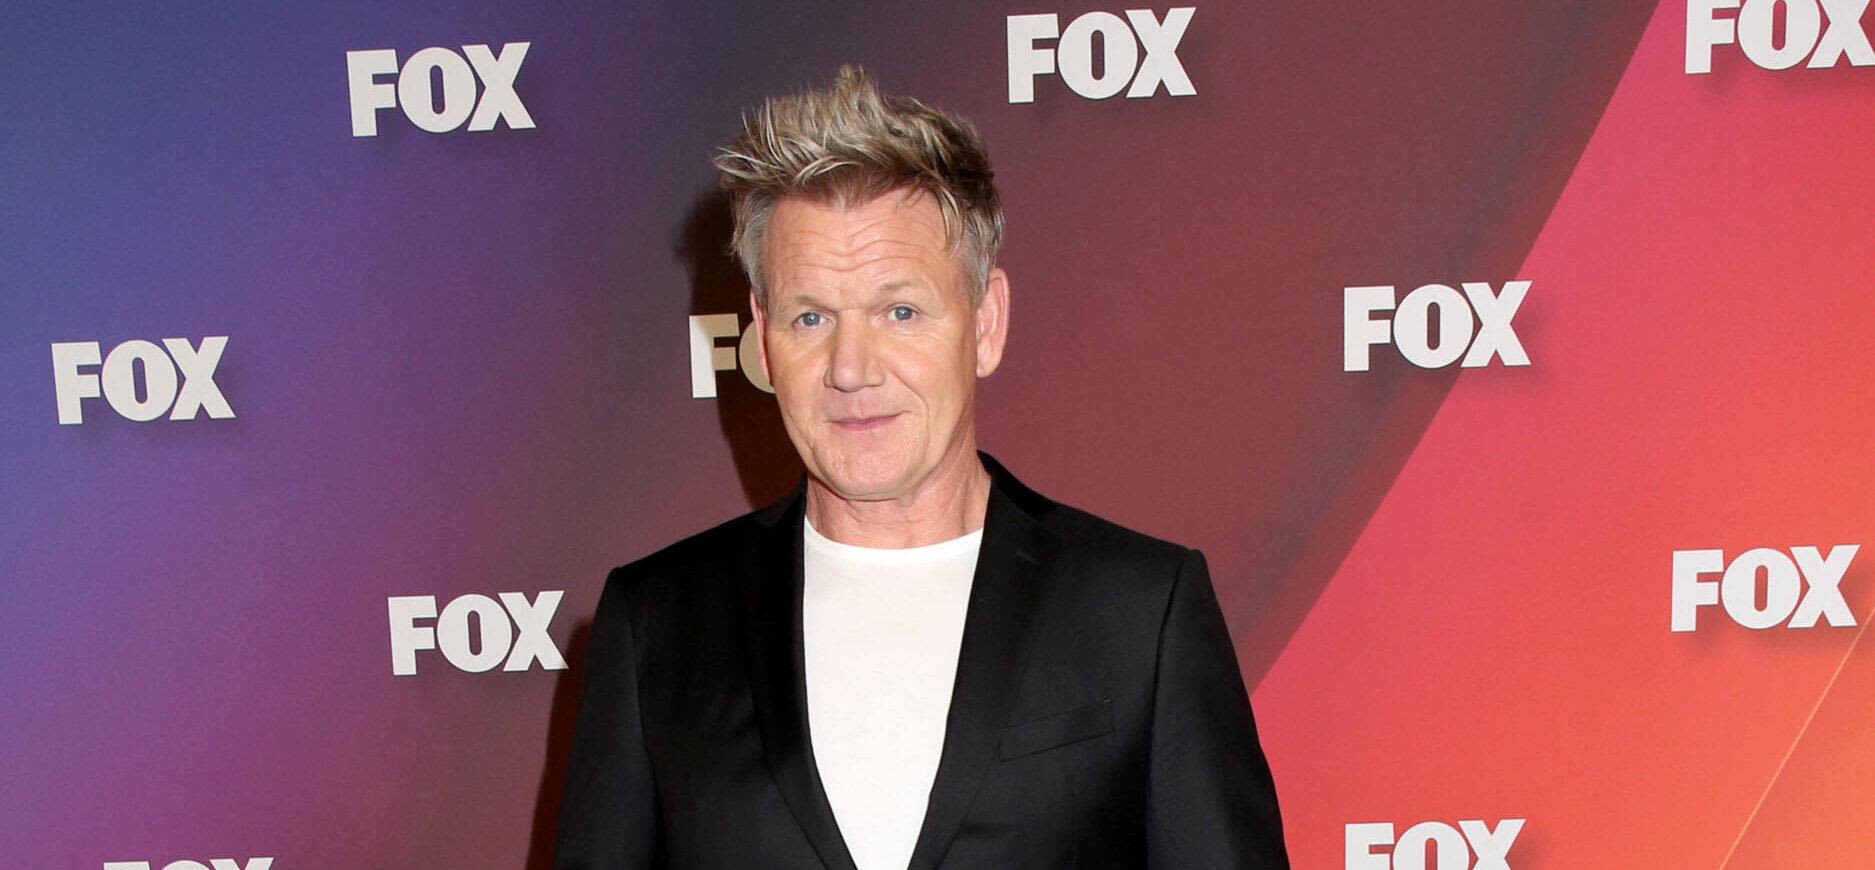 Gordon Ramsay Says He's 'On The Mend' After Accident That Left Him With Horrific Bruises